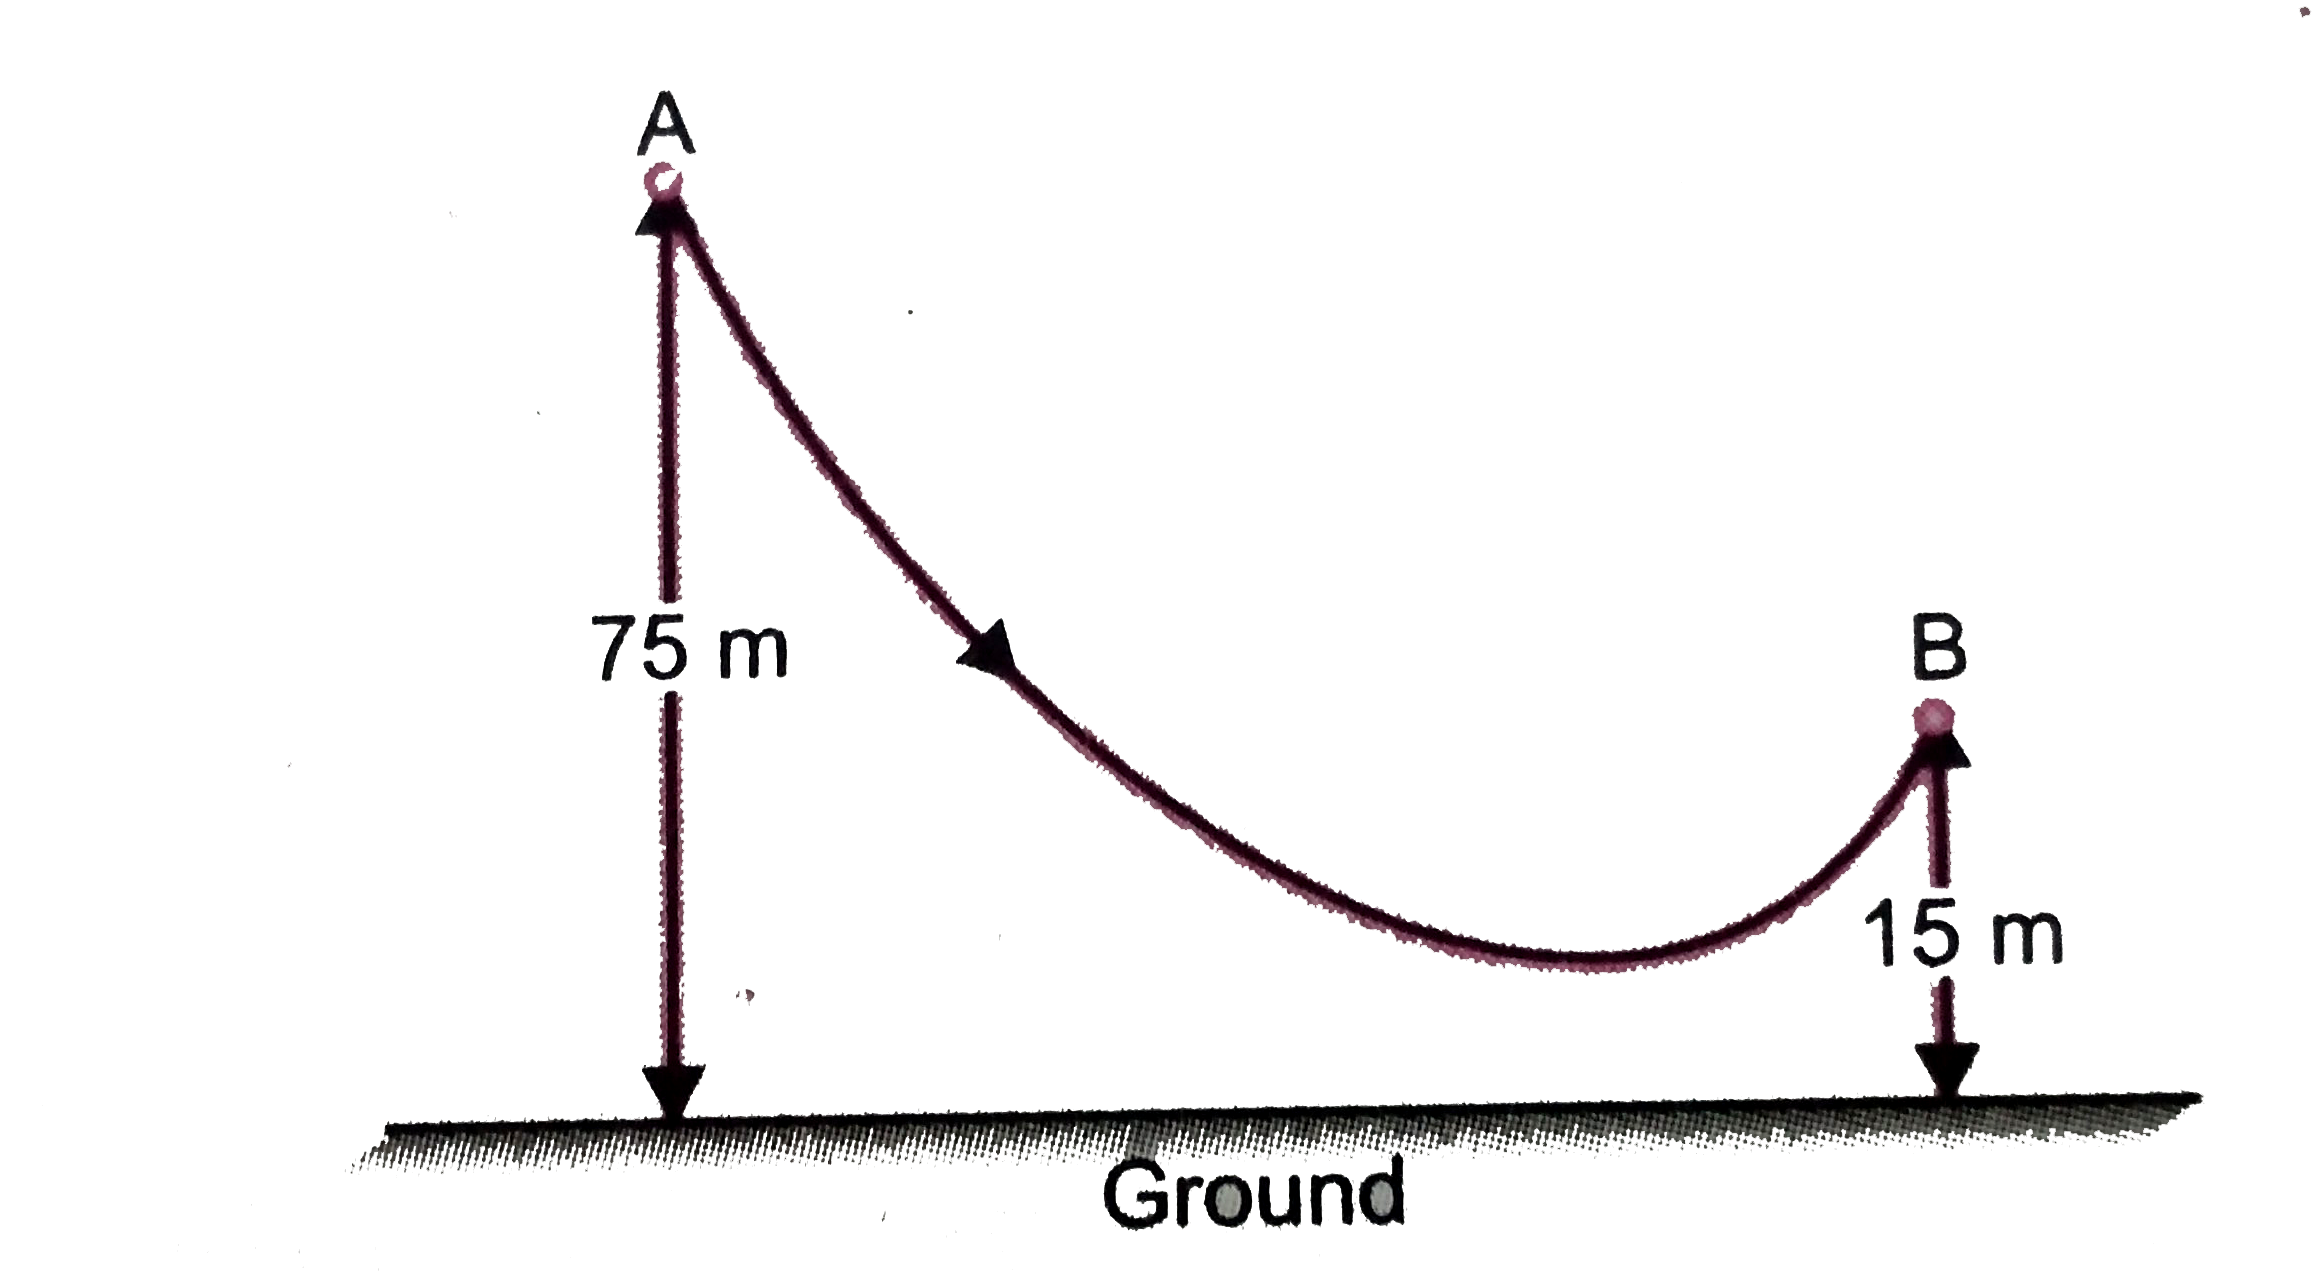 shows a ski -jump. A skier of mass 60 kg stands at A at the top of the ski-jump. He moves from A to B and takes off for his jump at B.   (a) Calculate the change in the gravitational potential energy of the skier between A and B.  (b) If 75 % of the energy in part (a) becomes the kinetic energy at B, calculate the speed at which the skier arrives at B.